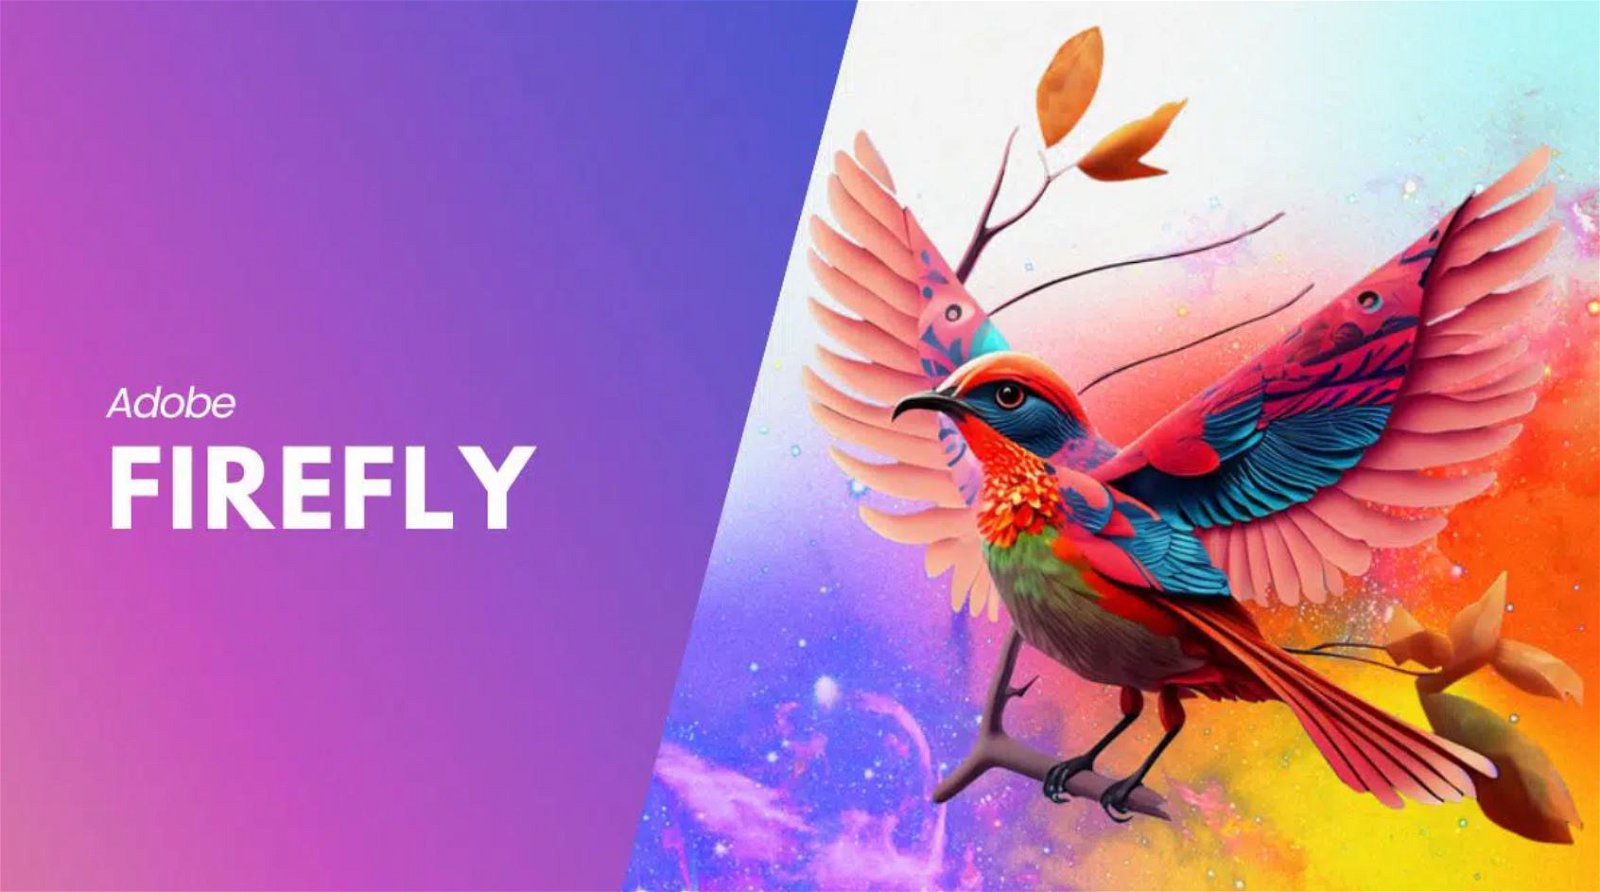 Adobe Unveils Firefly Image 3, Its Most Advanced Image Generation Model Yet